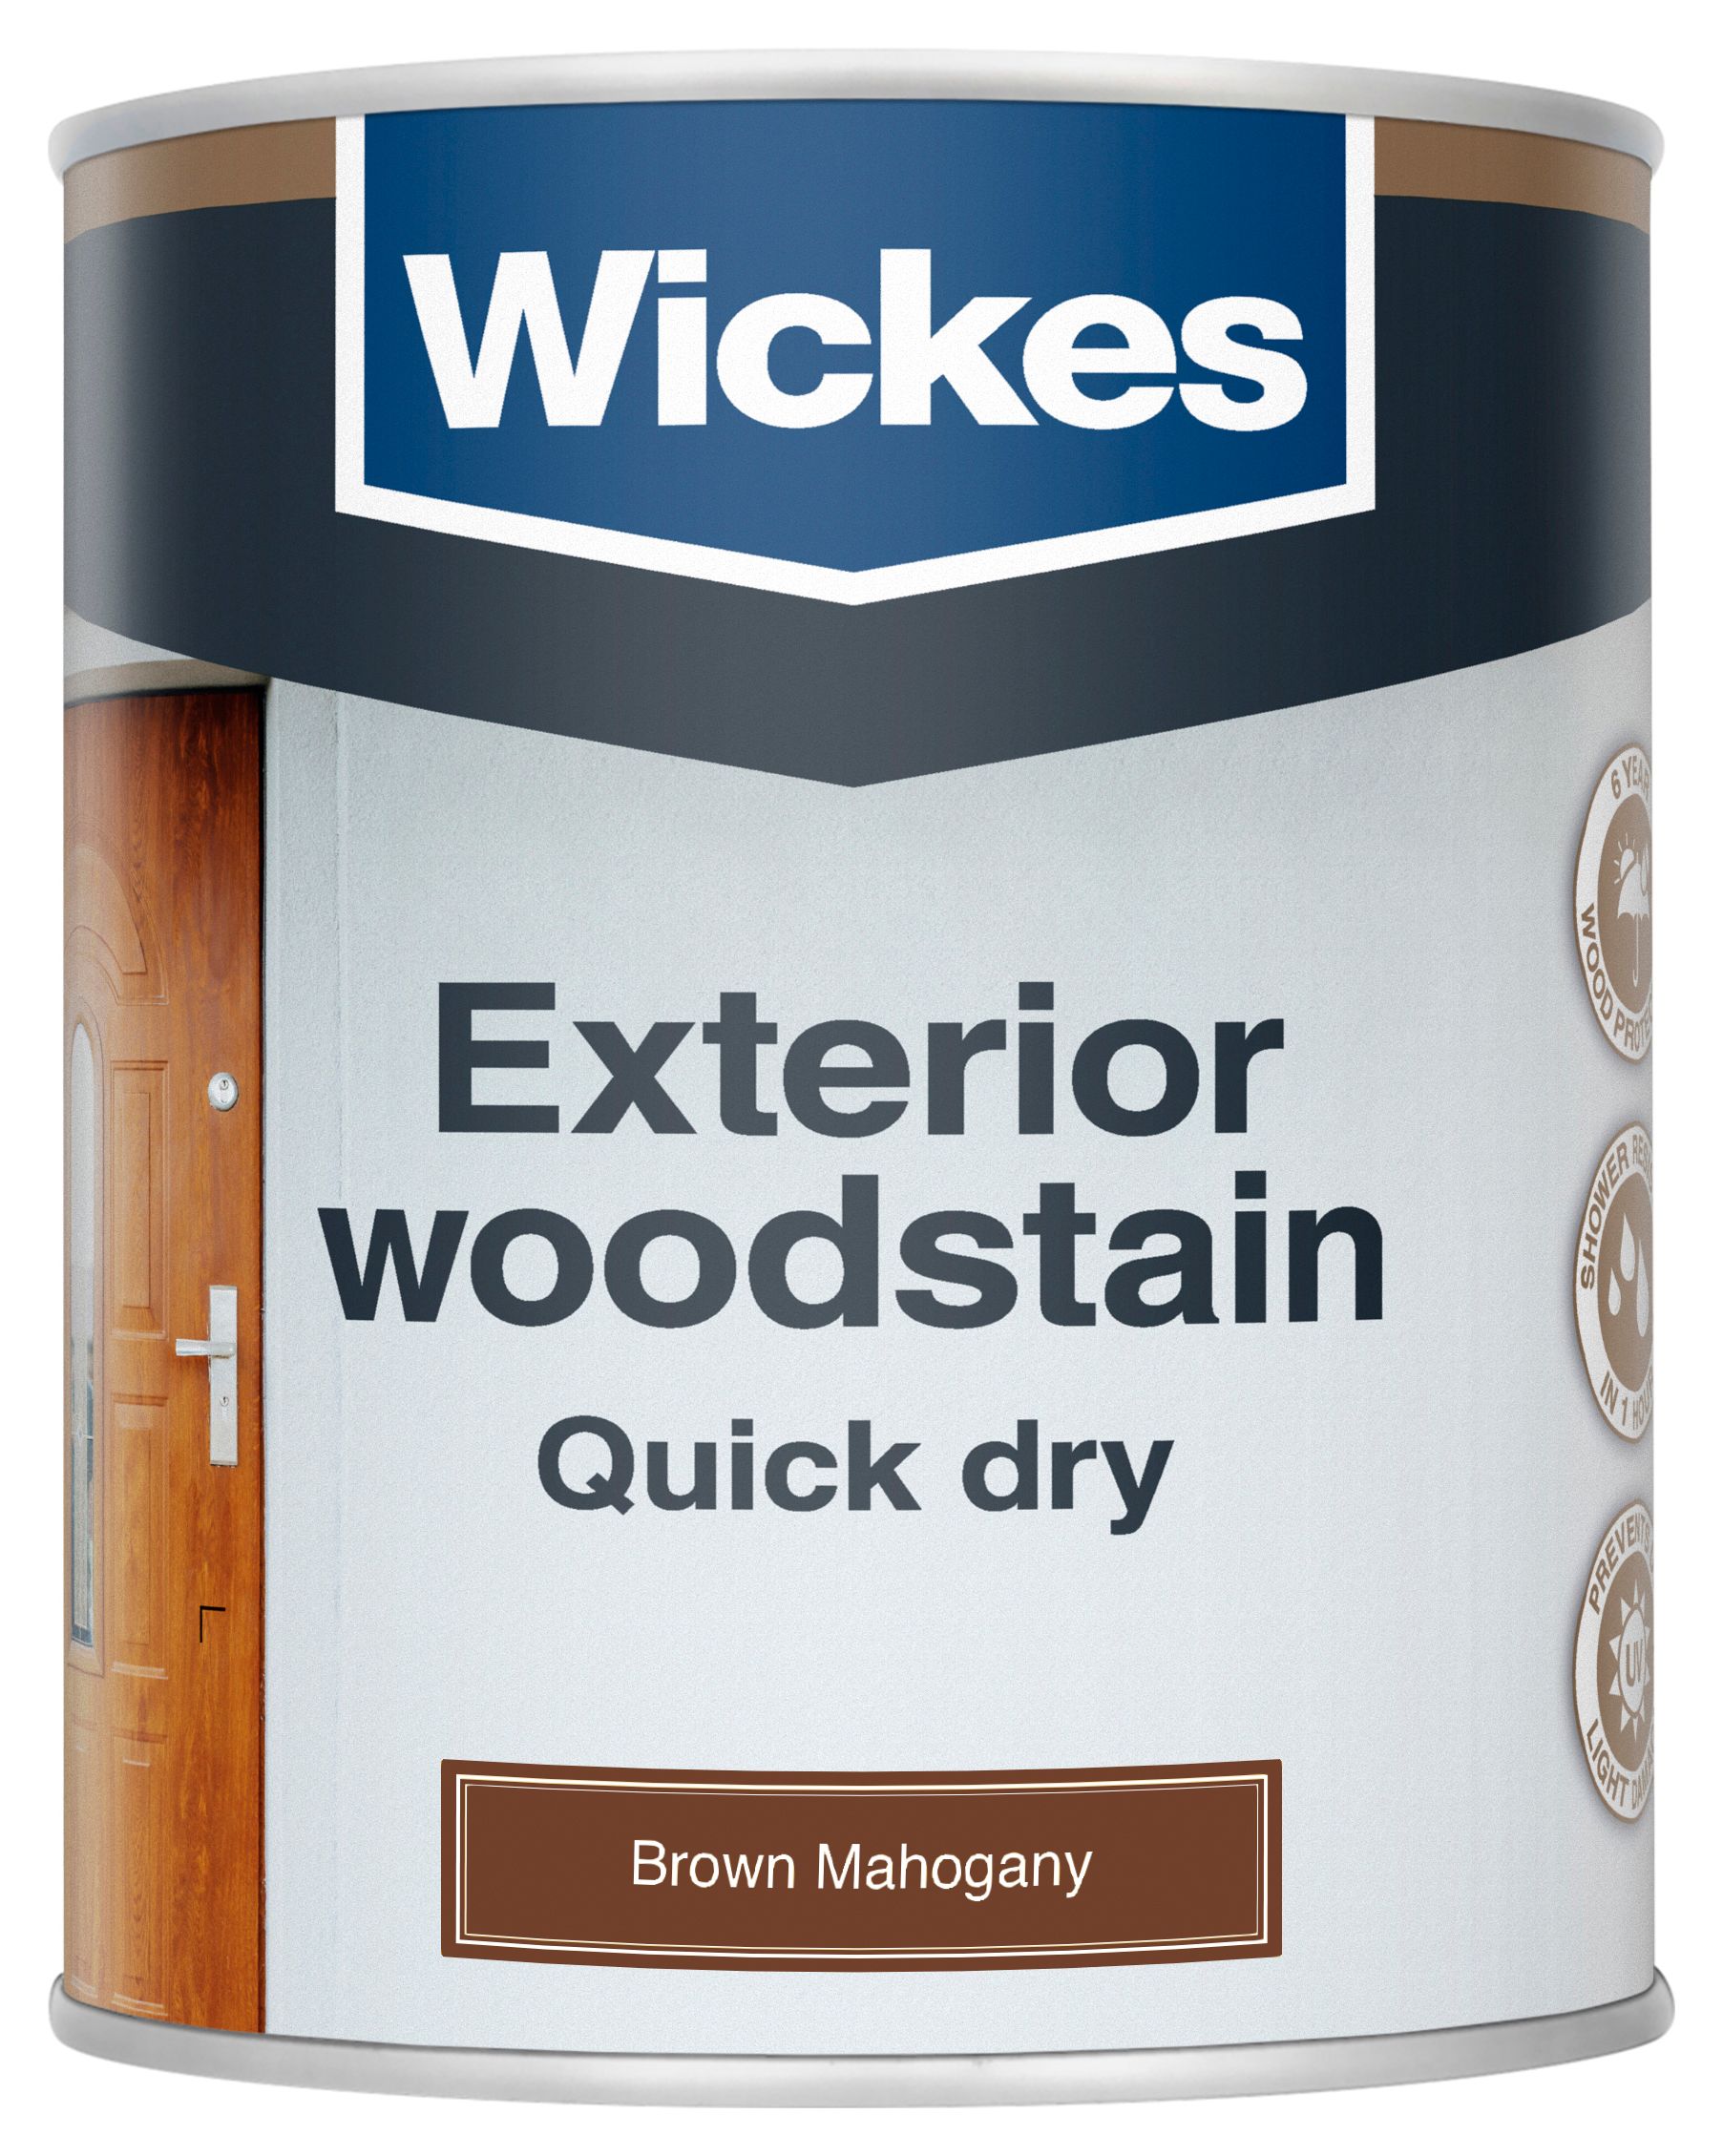 Wickes Exterior Quick Dry Woodstain - Brown Mahogany - 750ml